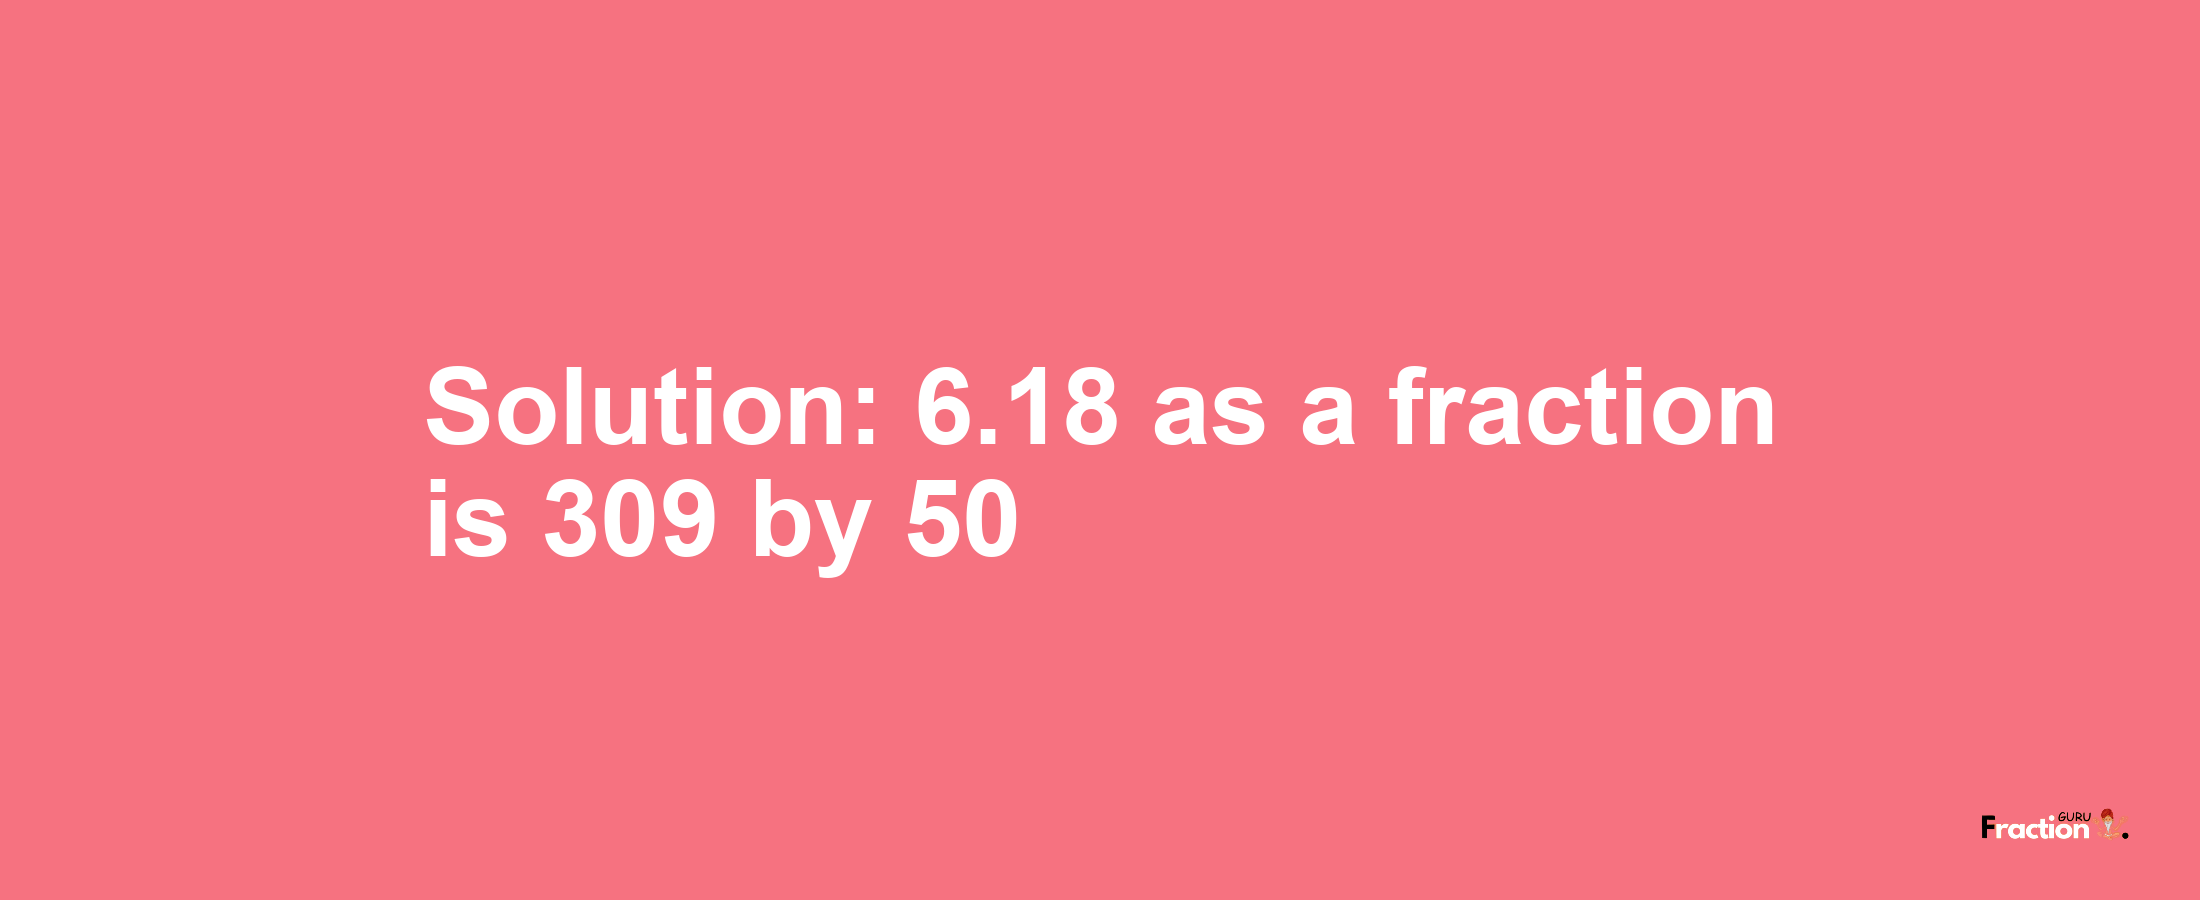 Solution:6.18 as a fraction is 309/50